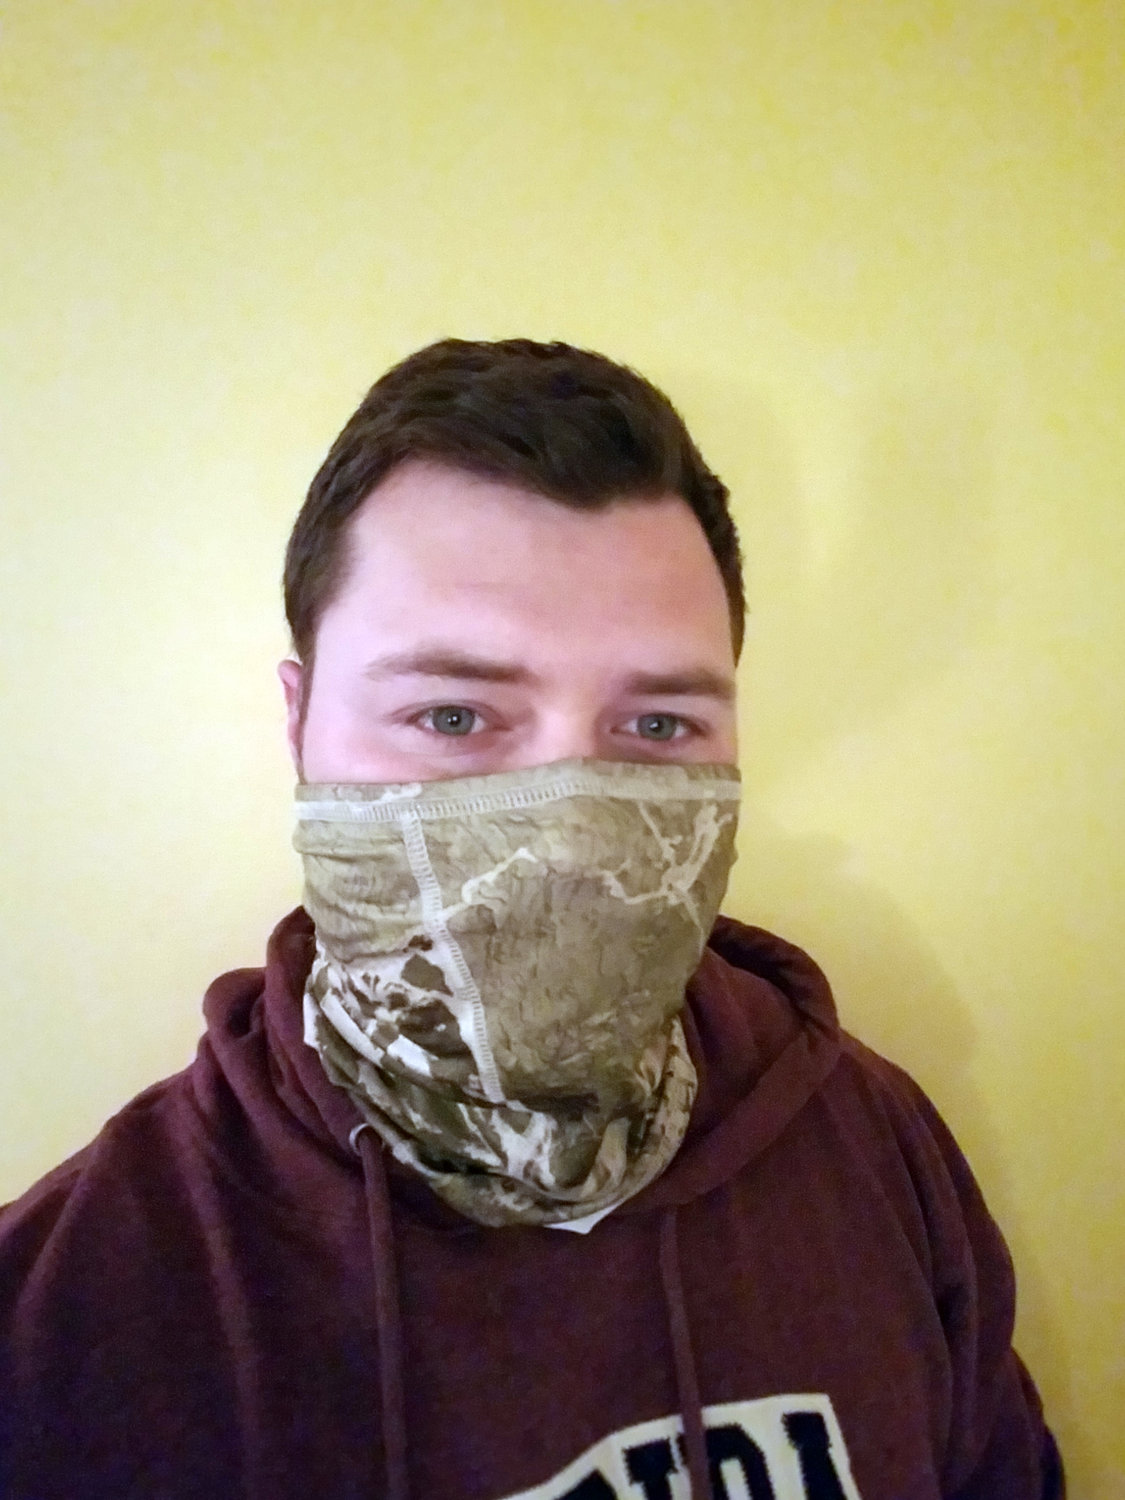 The face mask that is convenient for fishing or, in pandemic times, for just day-to-day living.